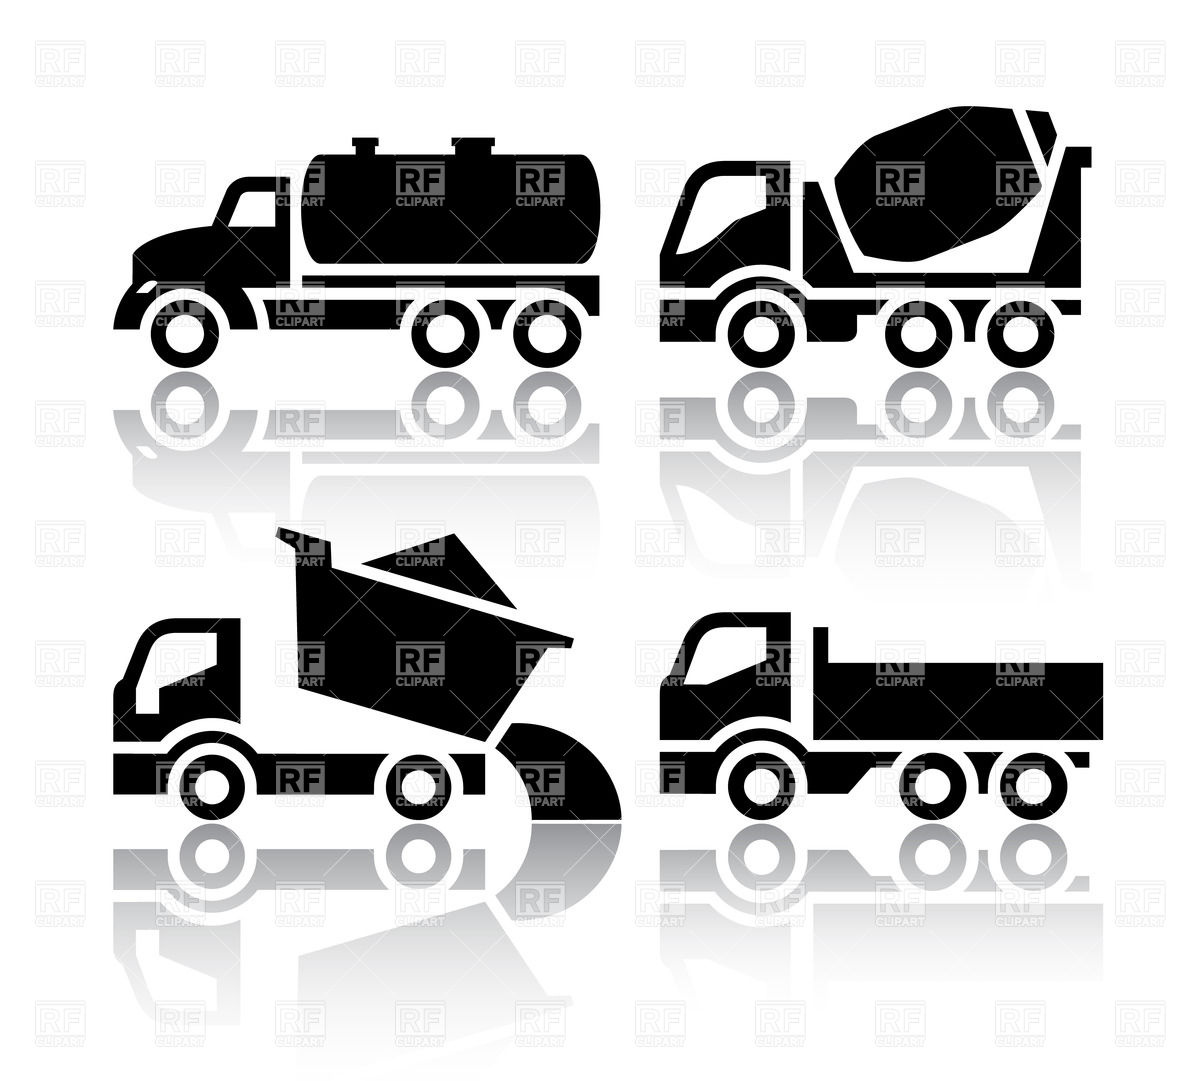 Concrete Mixer Truck 18115 Download Royalty Free Vector Clipart  Eps